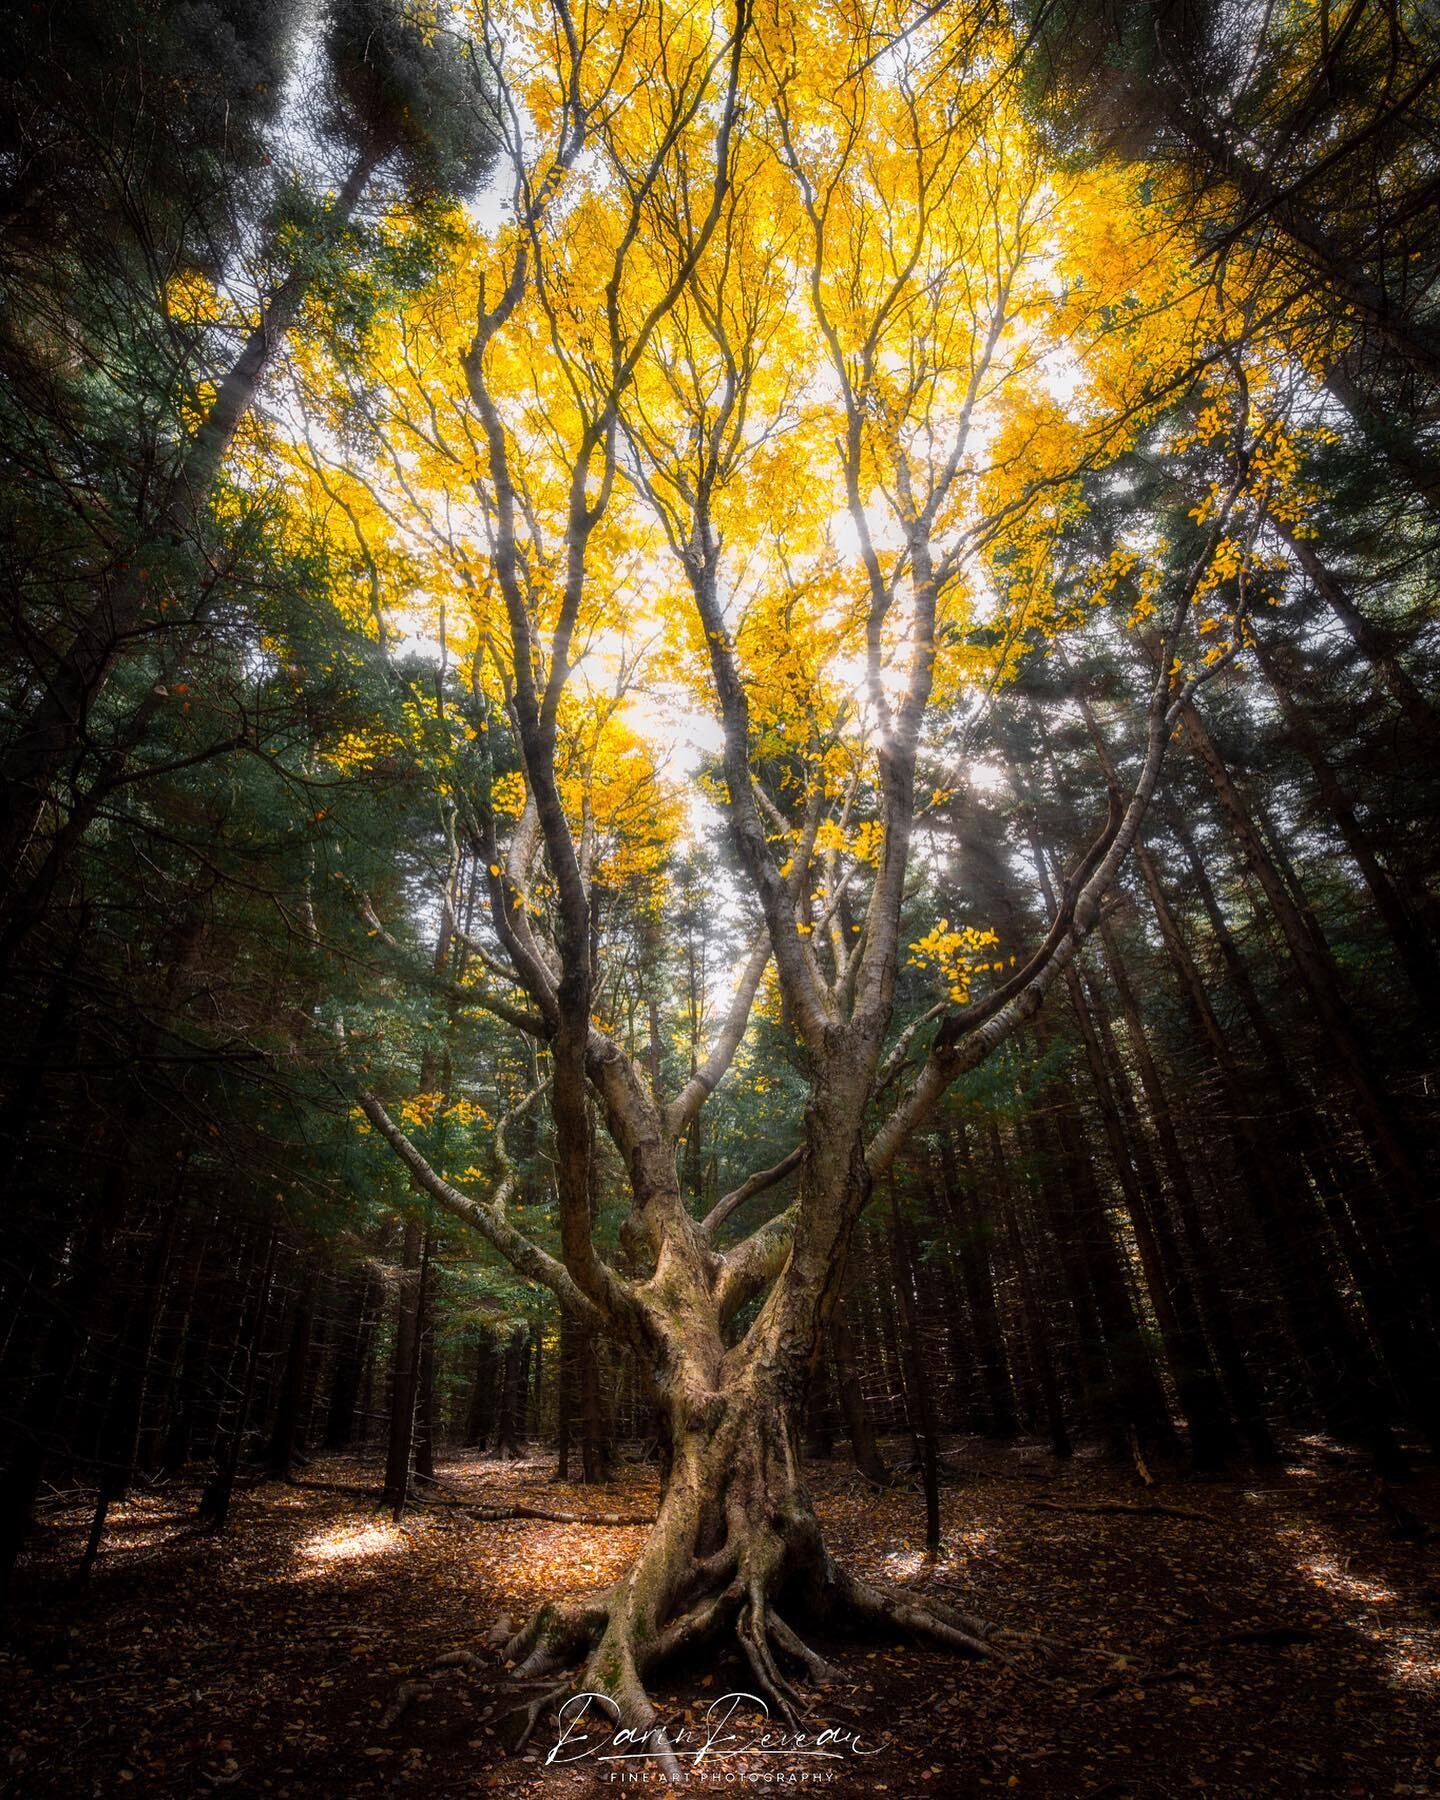 &ldquo;Tree of Life&rdquo; in West Virginia. By far one of my favorite places to visit in the fall. Early afternoon in October lights this tree up with glowing yellows. 

This photo is available on fine art prints ranging in sizes from 8x12 to 60x90 